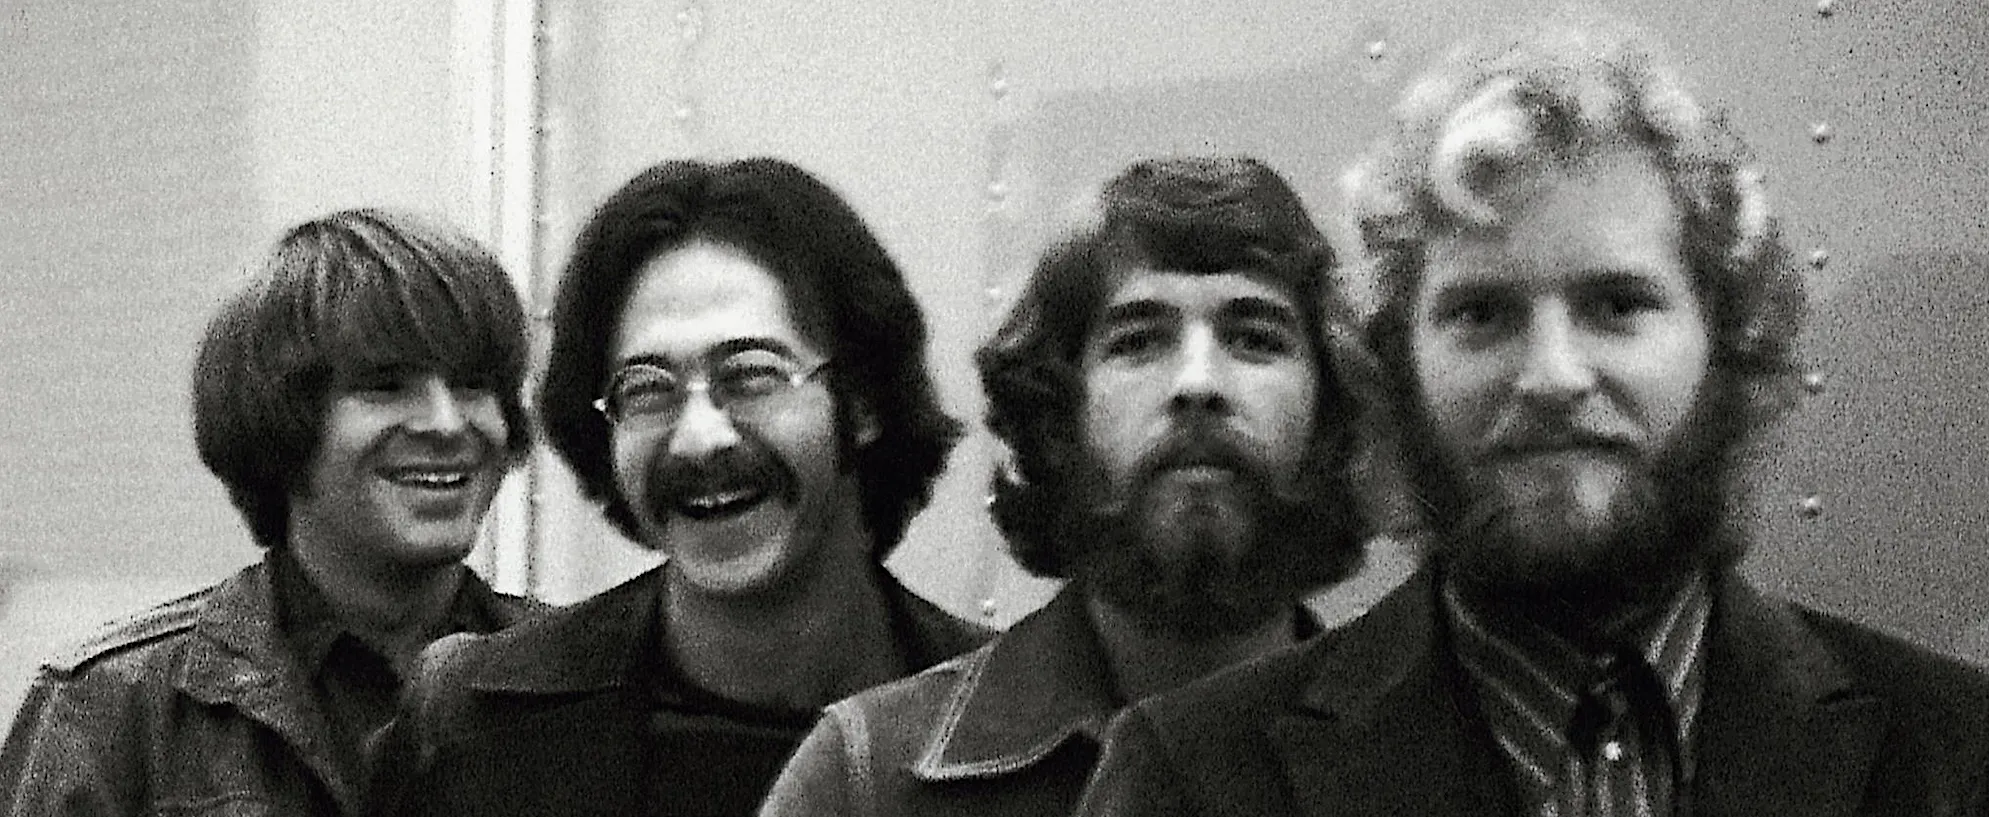 Creedence Clearwater Revival Share Never-Released Live Performance of “Proud Mary”